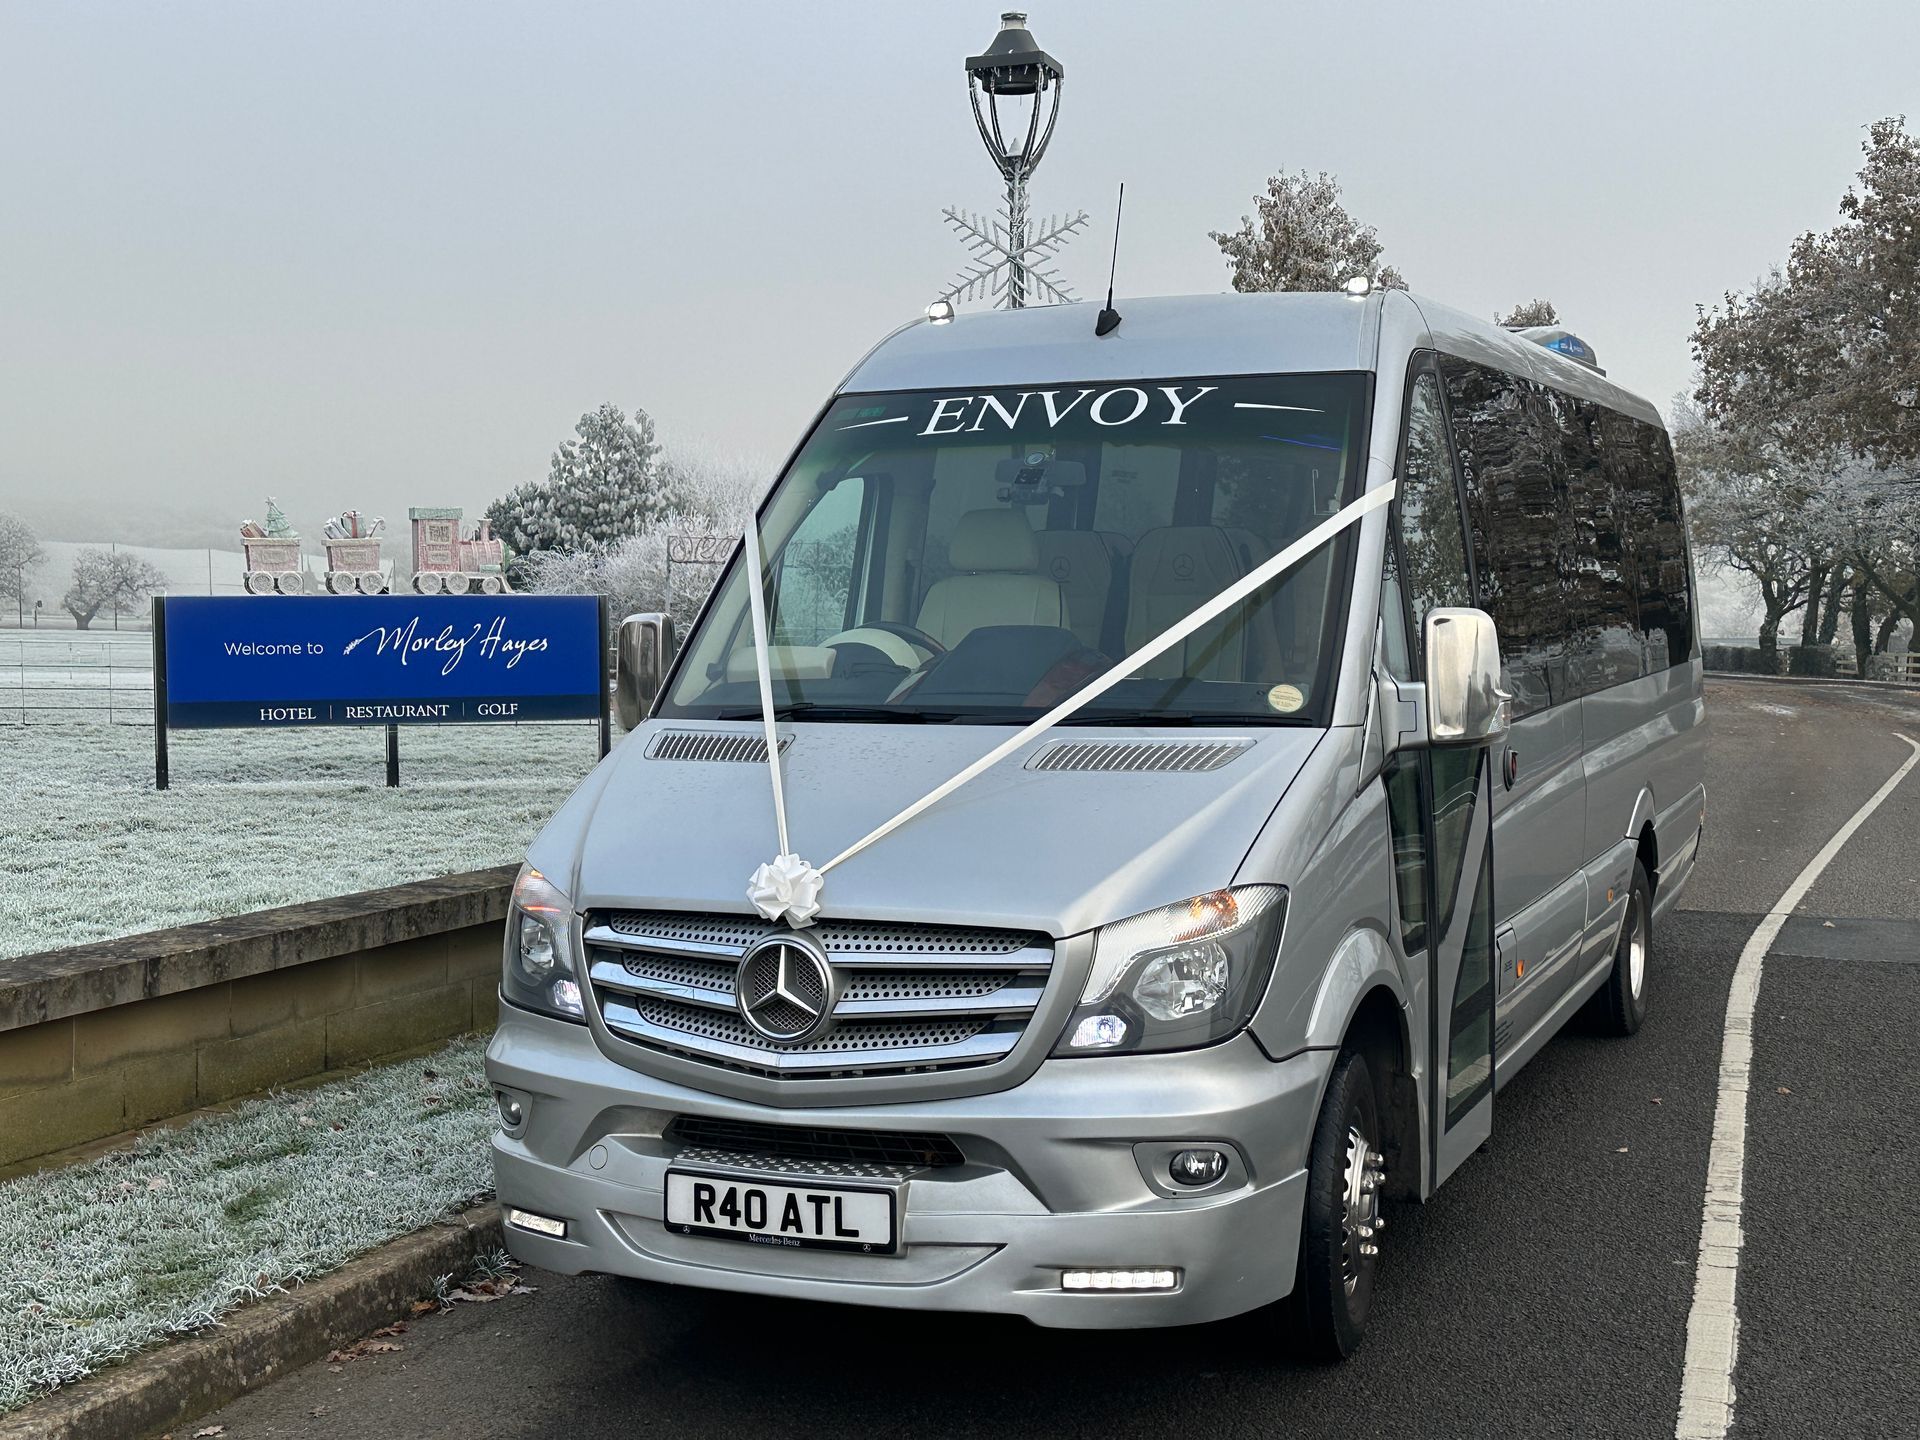 Transportation for special events